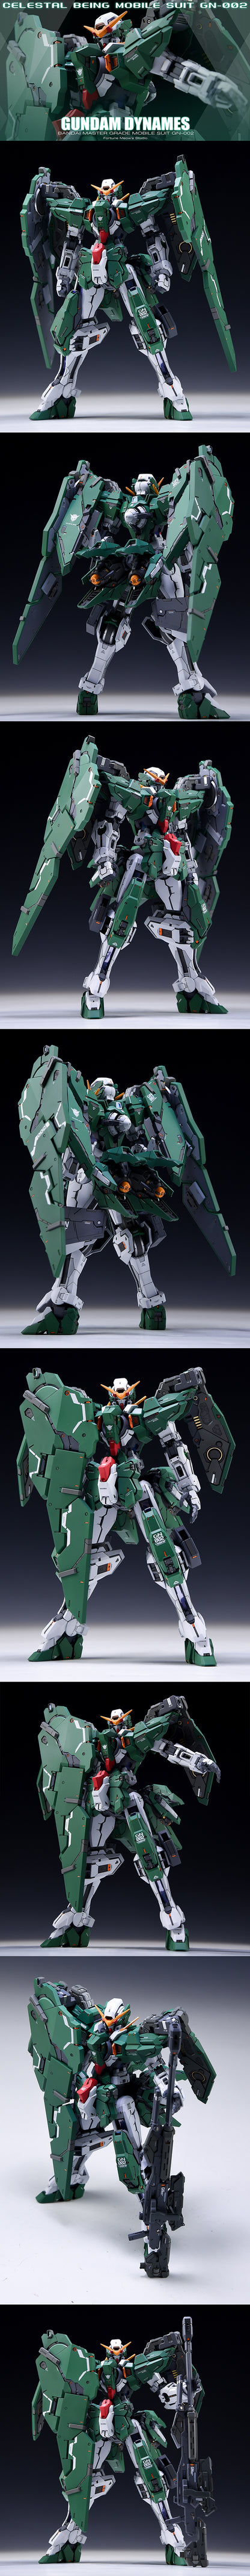 Fortune Meow Studios MG Dynames Conversion Kit